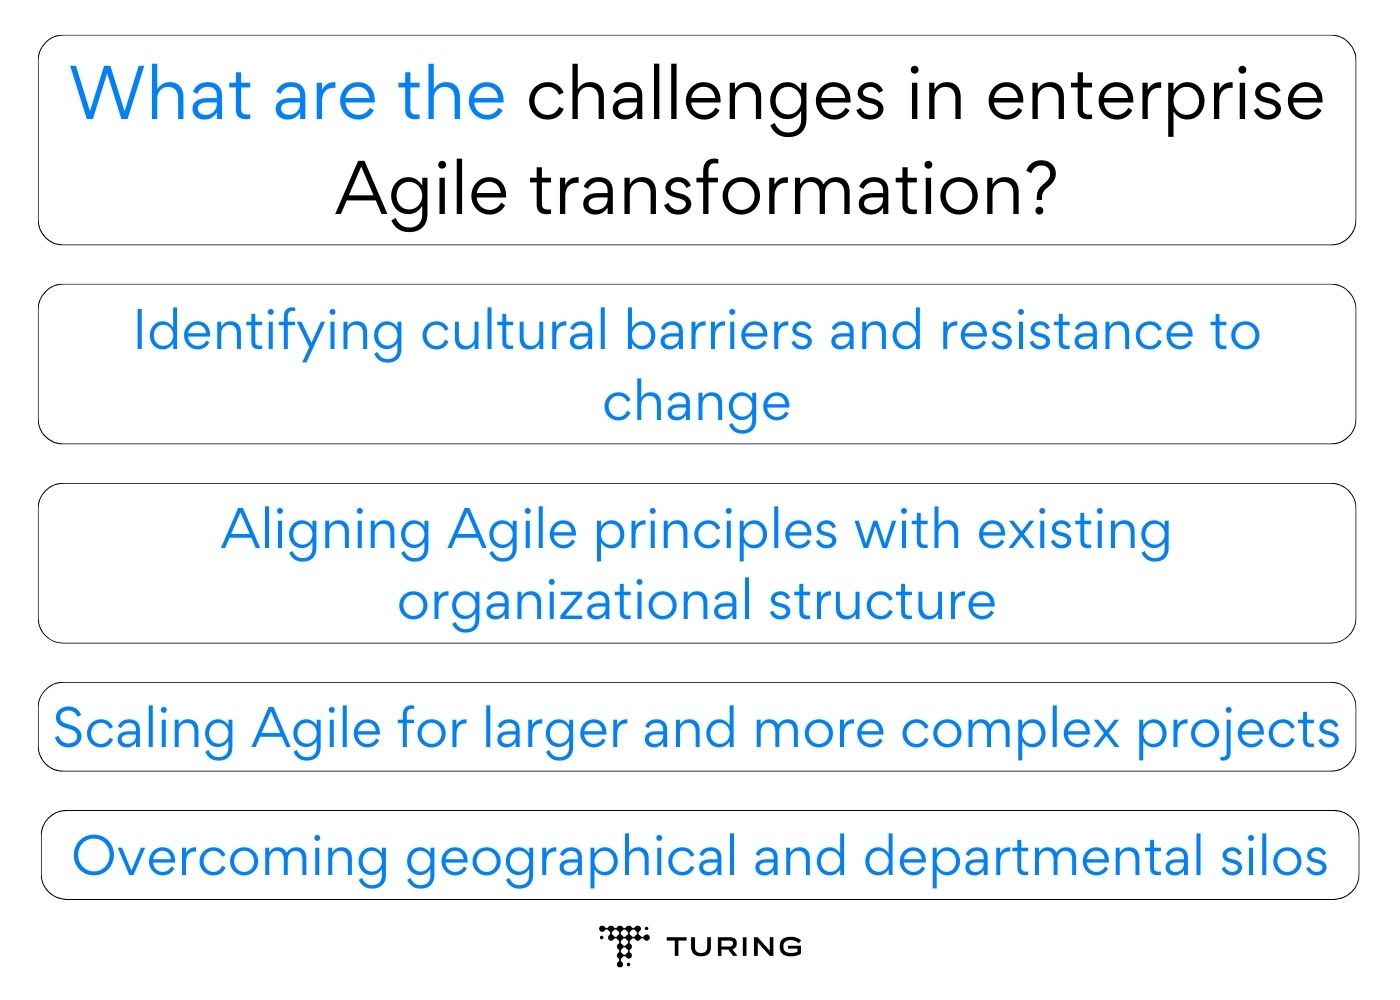 What are the challenges in enterprise Agile transformation?